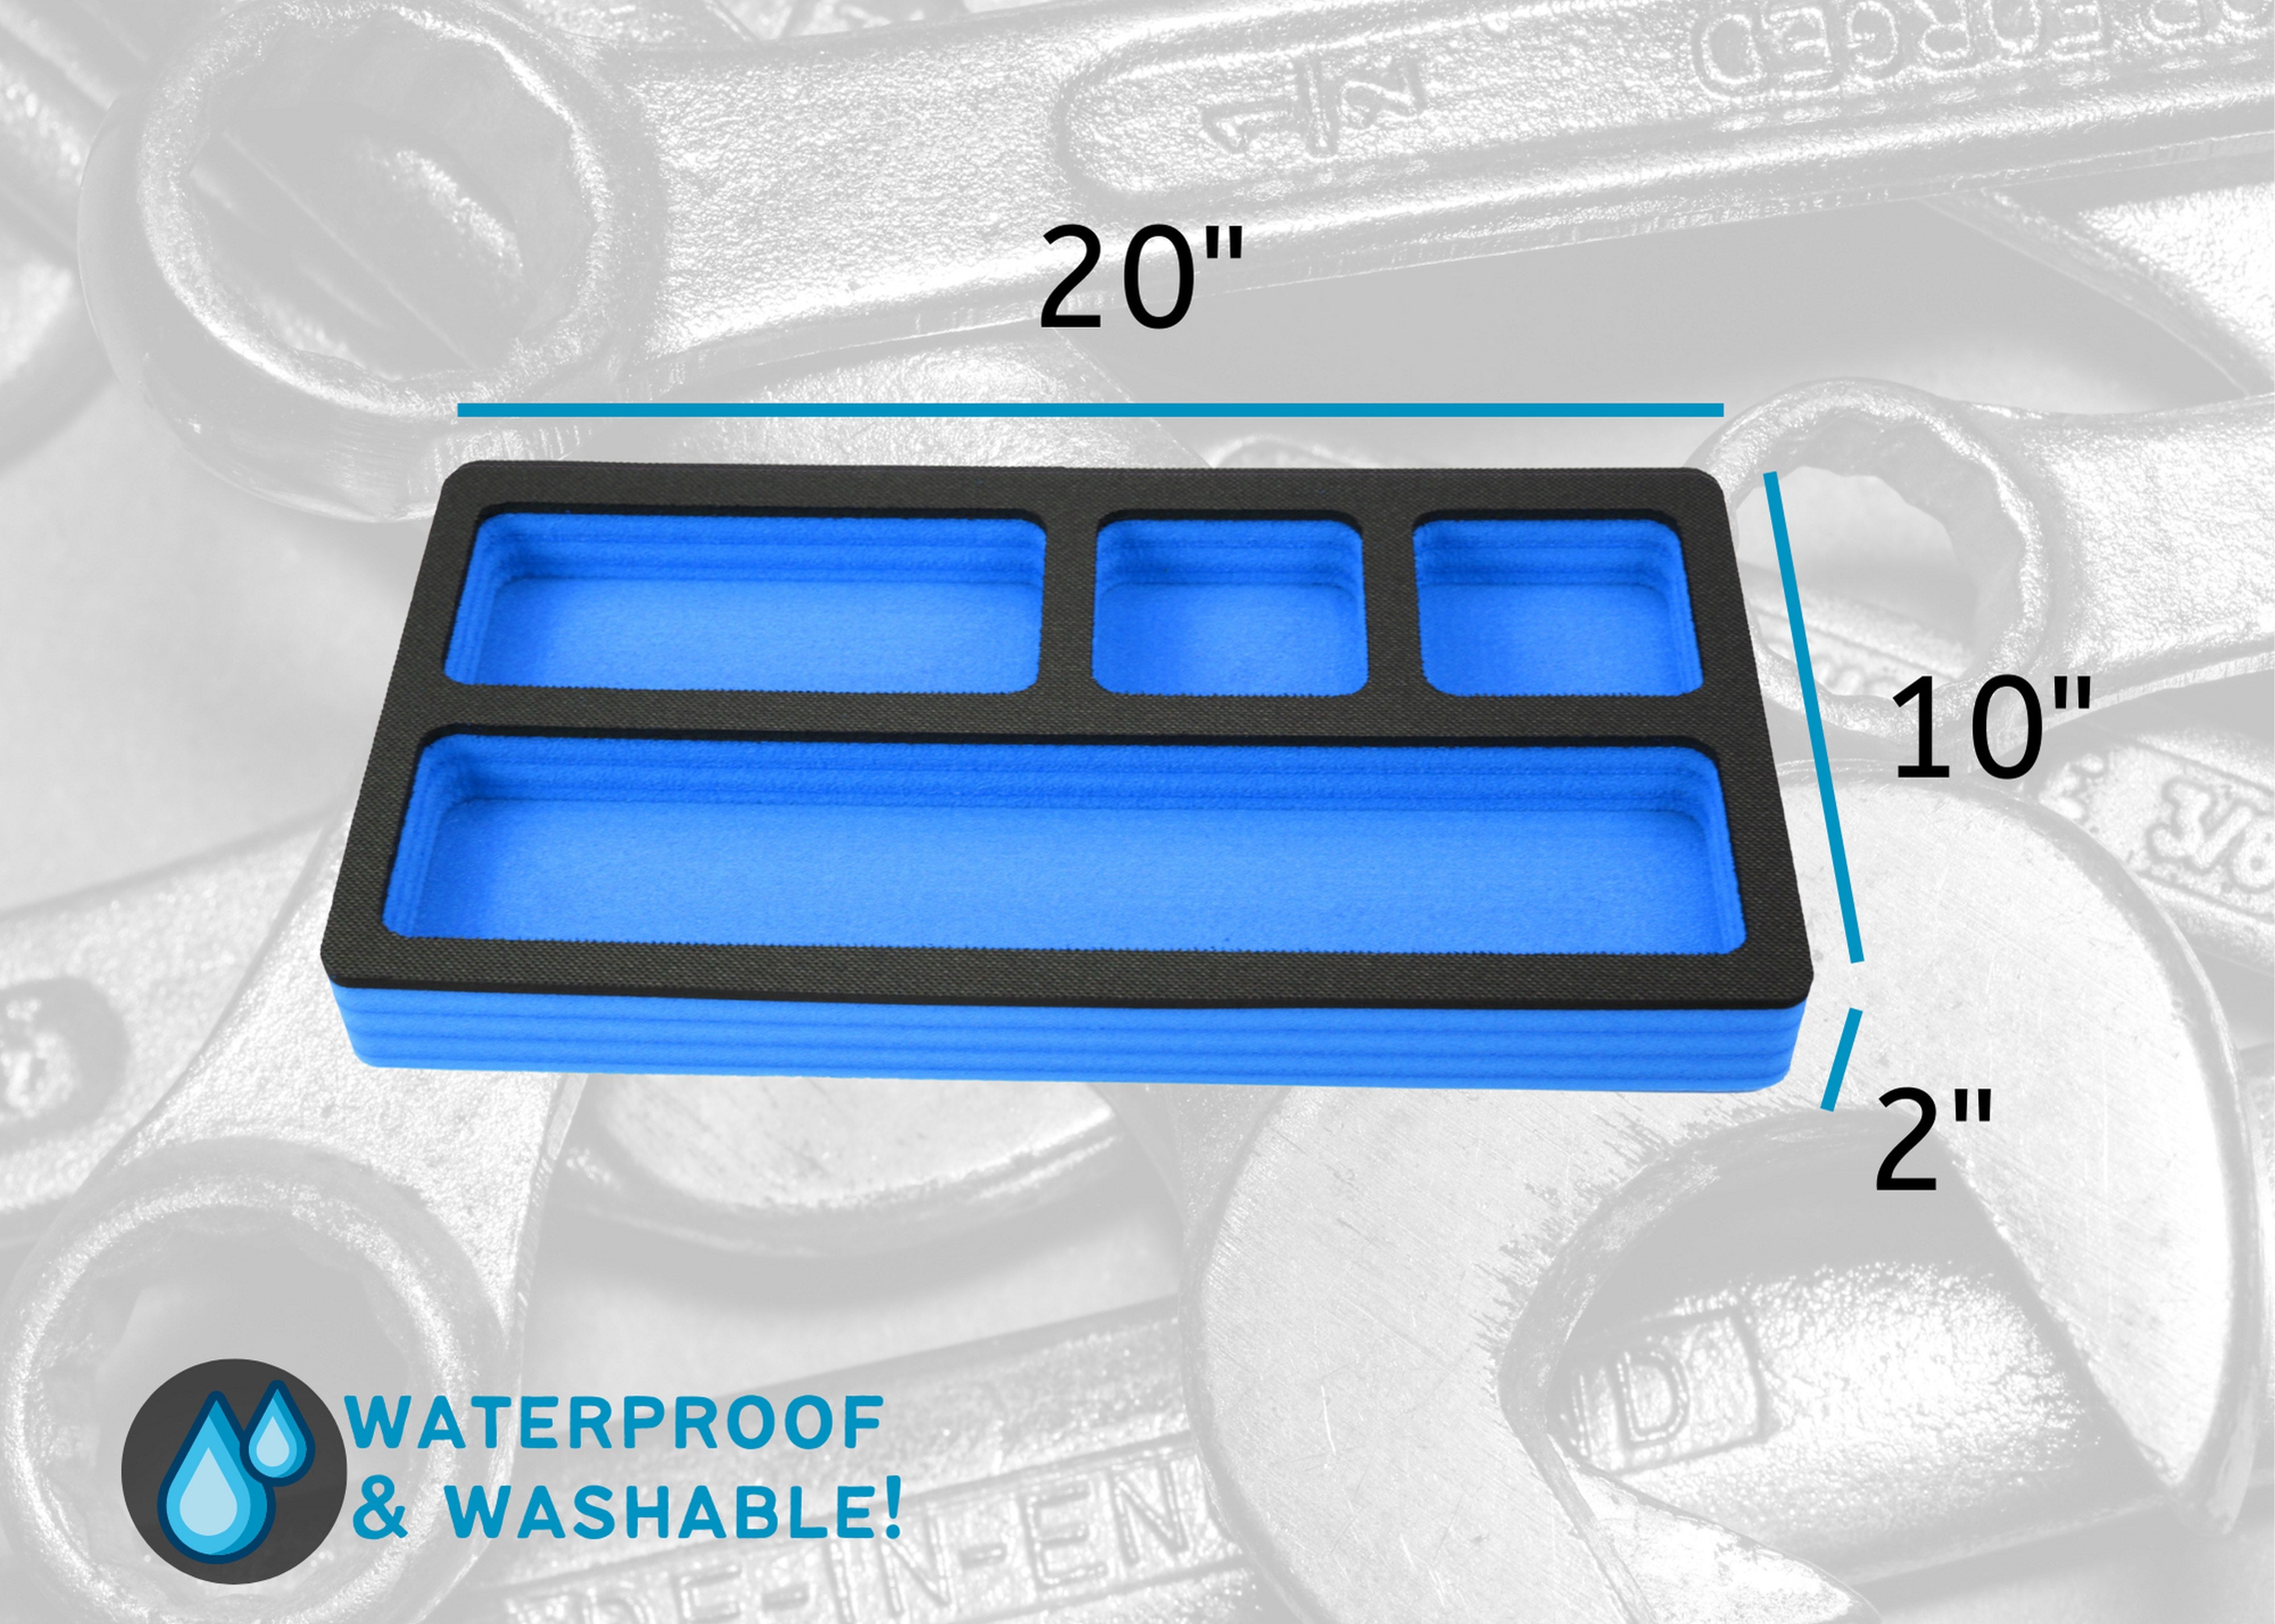 Tool Drawer Organizer Insert Blue and Black Durable Foam Strong Non-Slip Anti-Rattle Bin Holder Tray 20 x 10 Inches 4 Pockets Fits Craftsman Husky Kobalt Milwaukee and Many Others